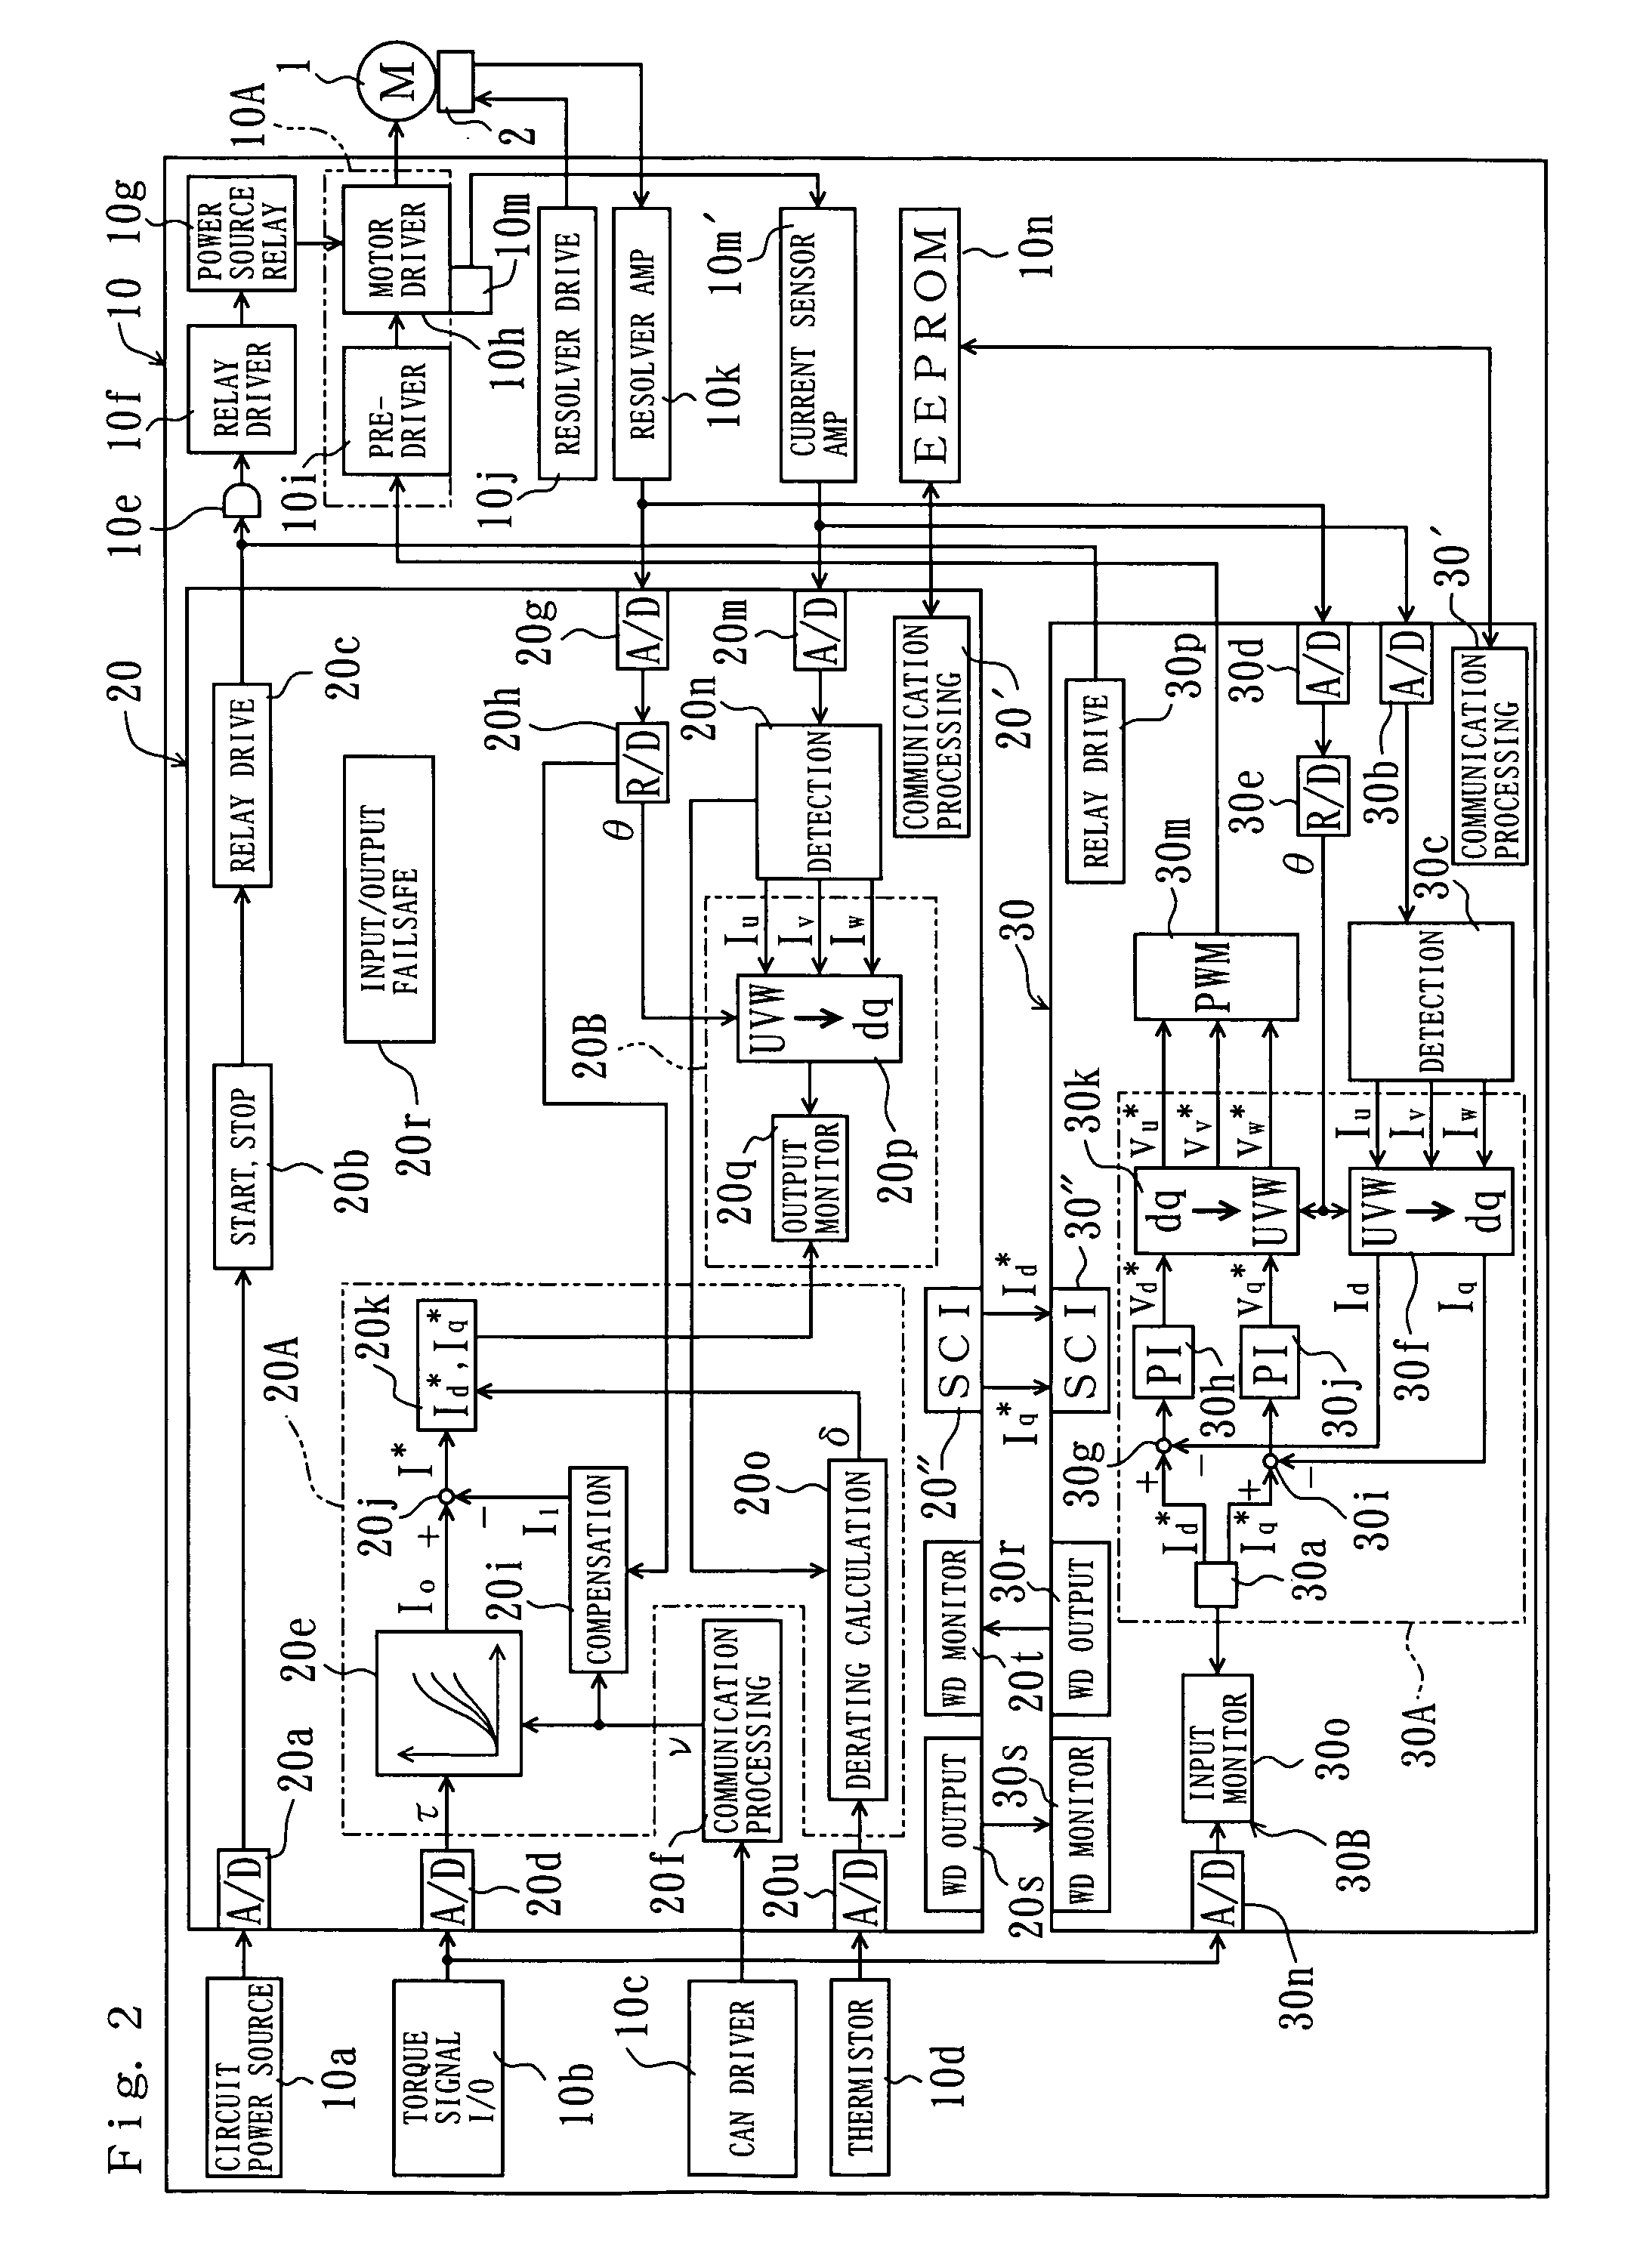 Controller for electric power steering apparatus